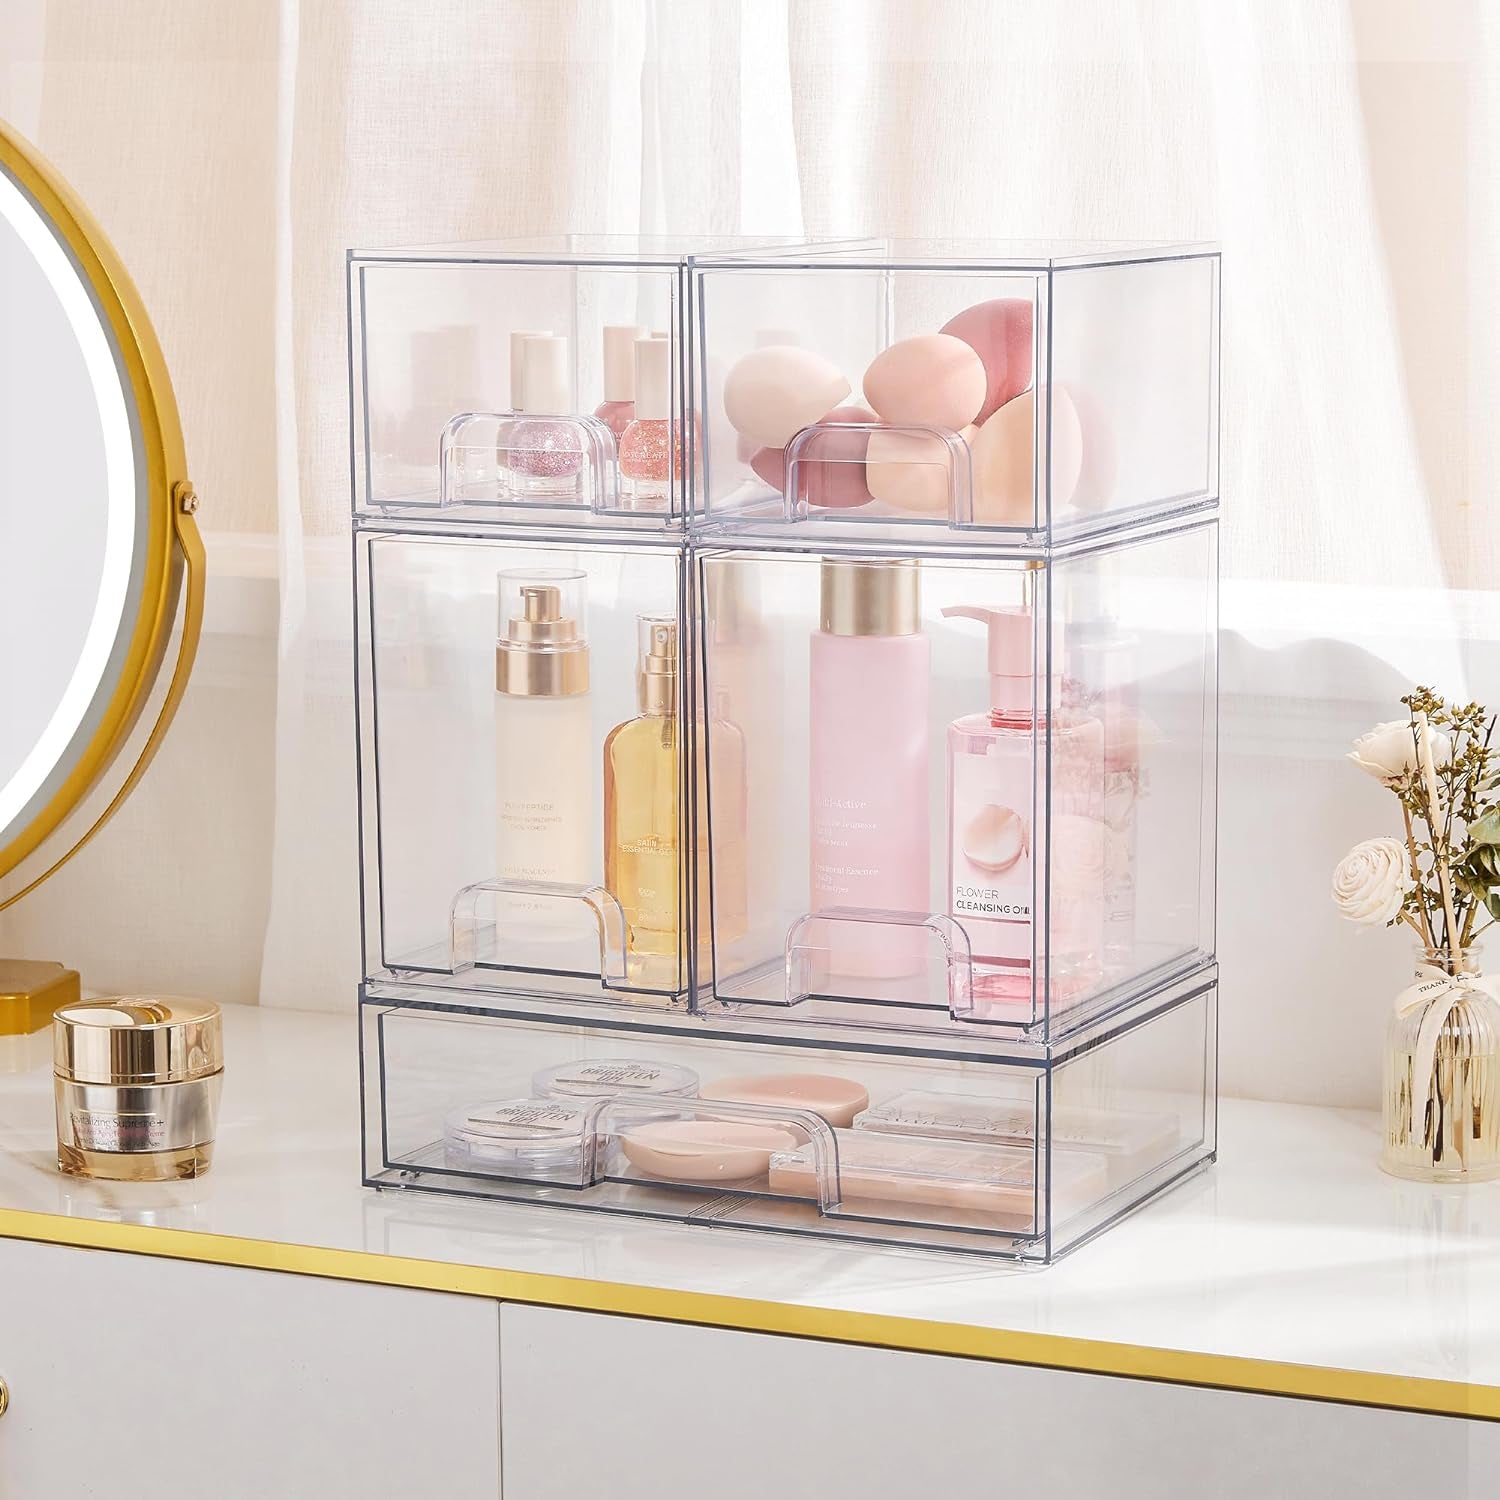 4 Pack Clear Stackable Storage Drawers, 4.4'' Tall Acrylic Bathroom Makeup Organizer,Plastic Storage Bins for Vanity, Undersink, Kitchen Cabinets, Pantry, Home Organization and Storage